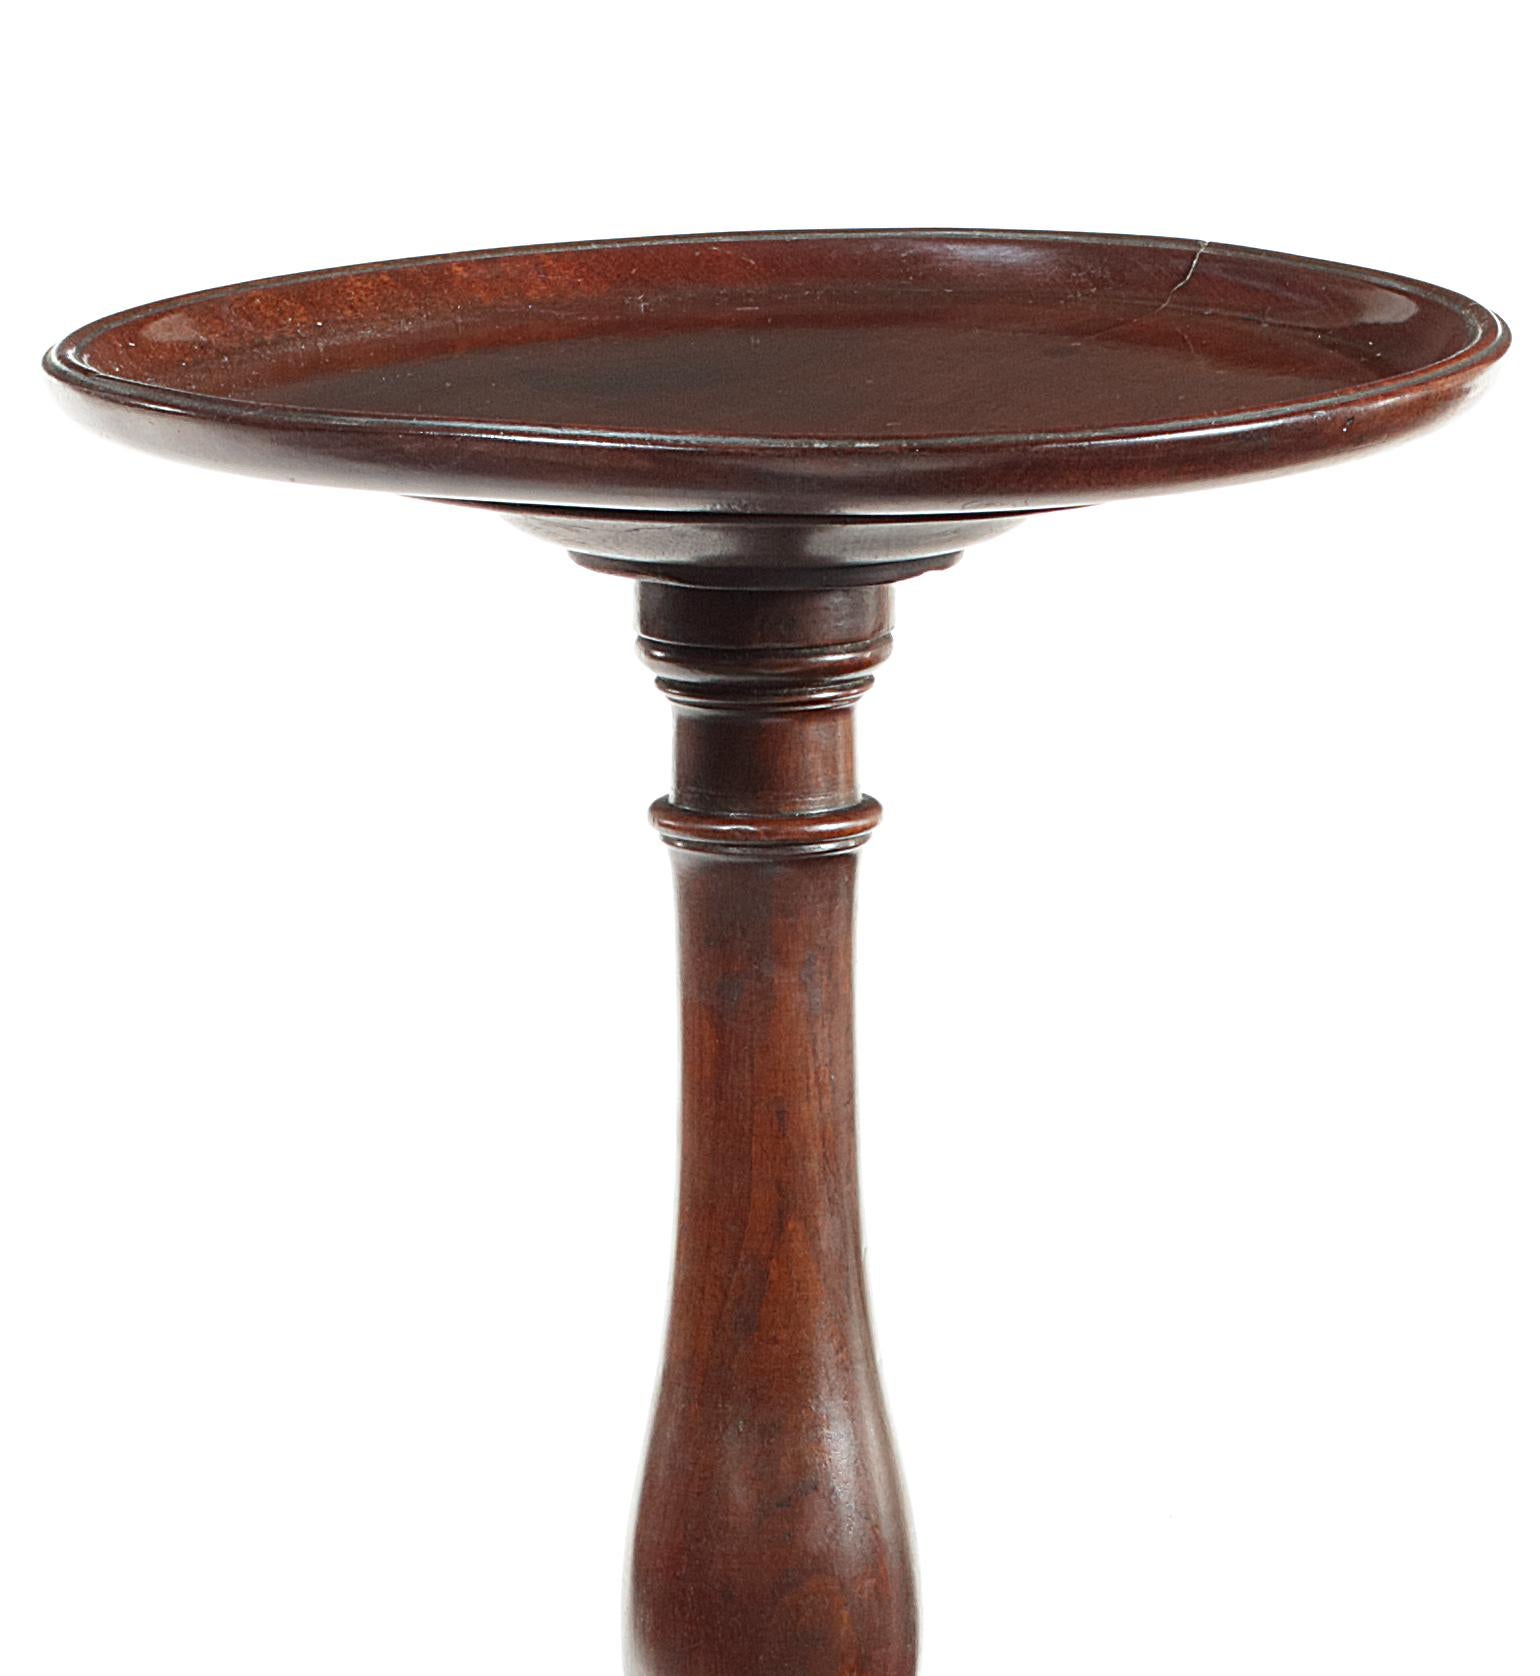 The circular dished top on a slender double baluster column and triform base with down swept legs and pad feet, measures: 31 cm diameter, 97 cm high.

  